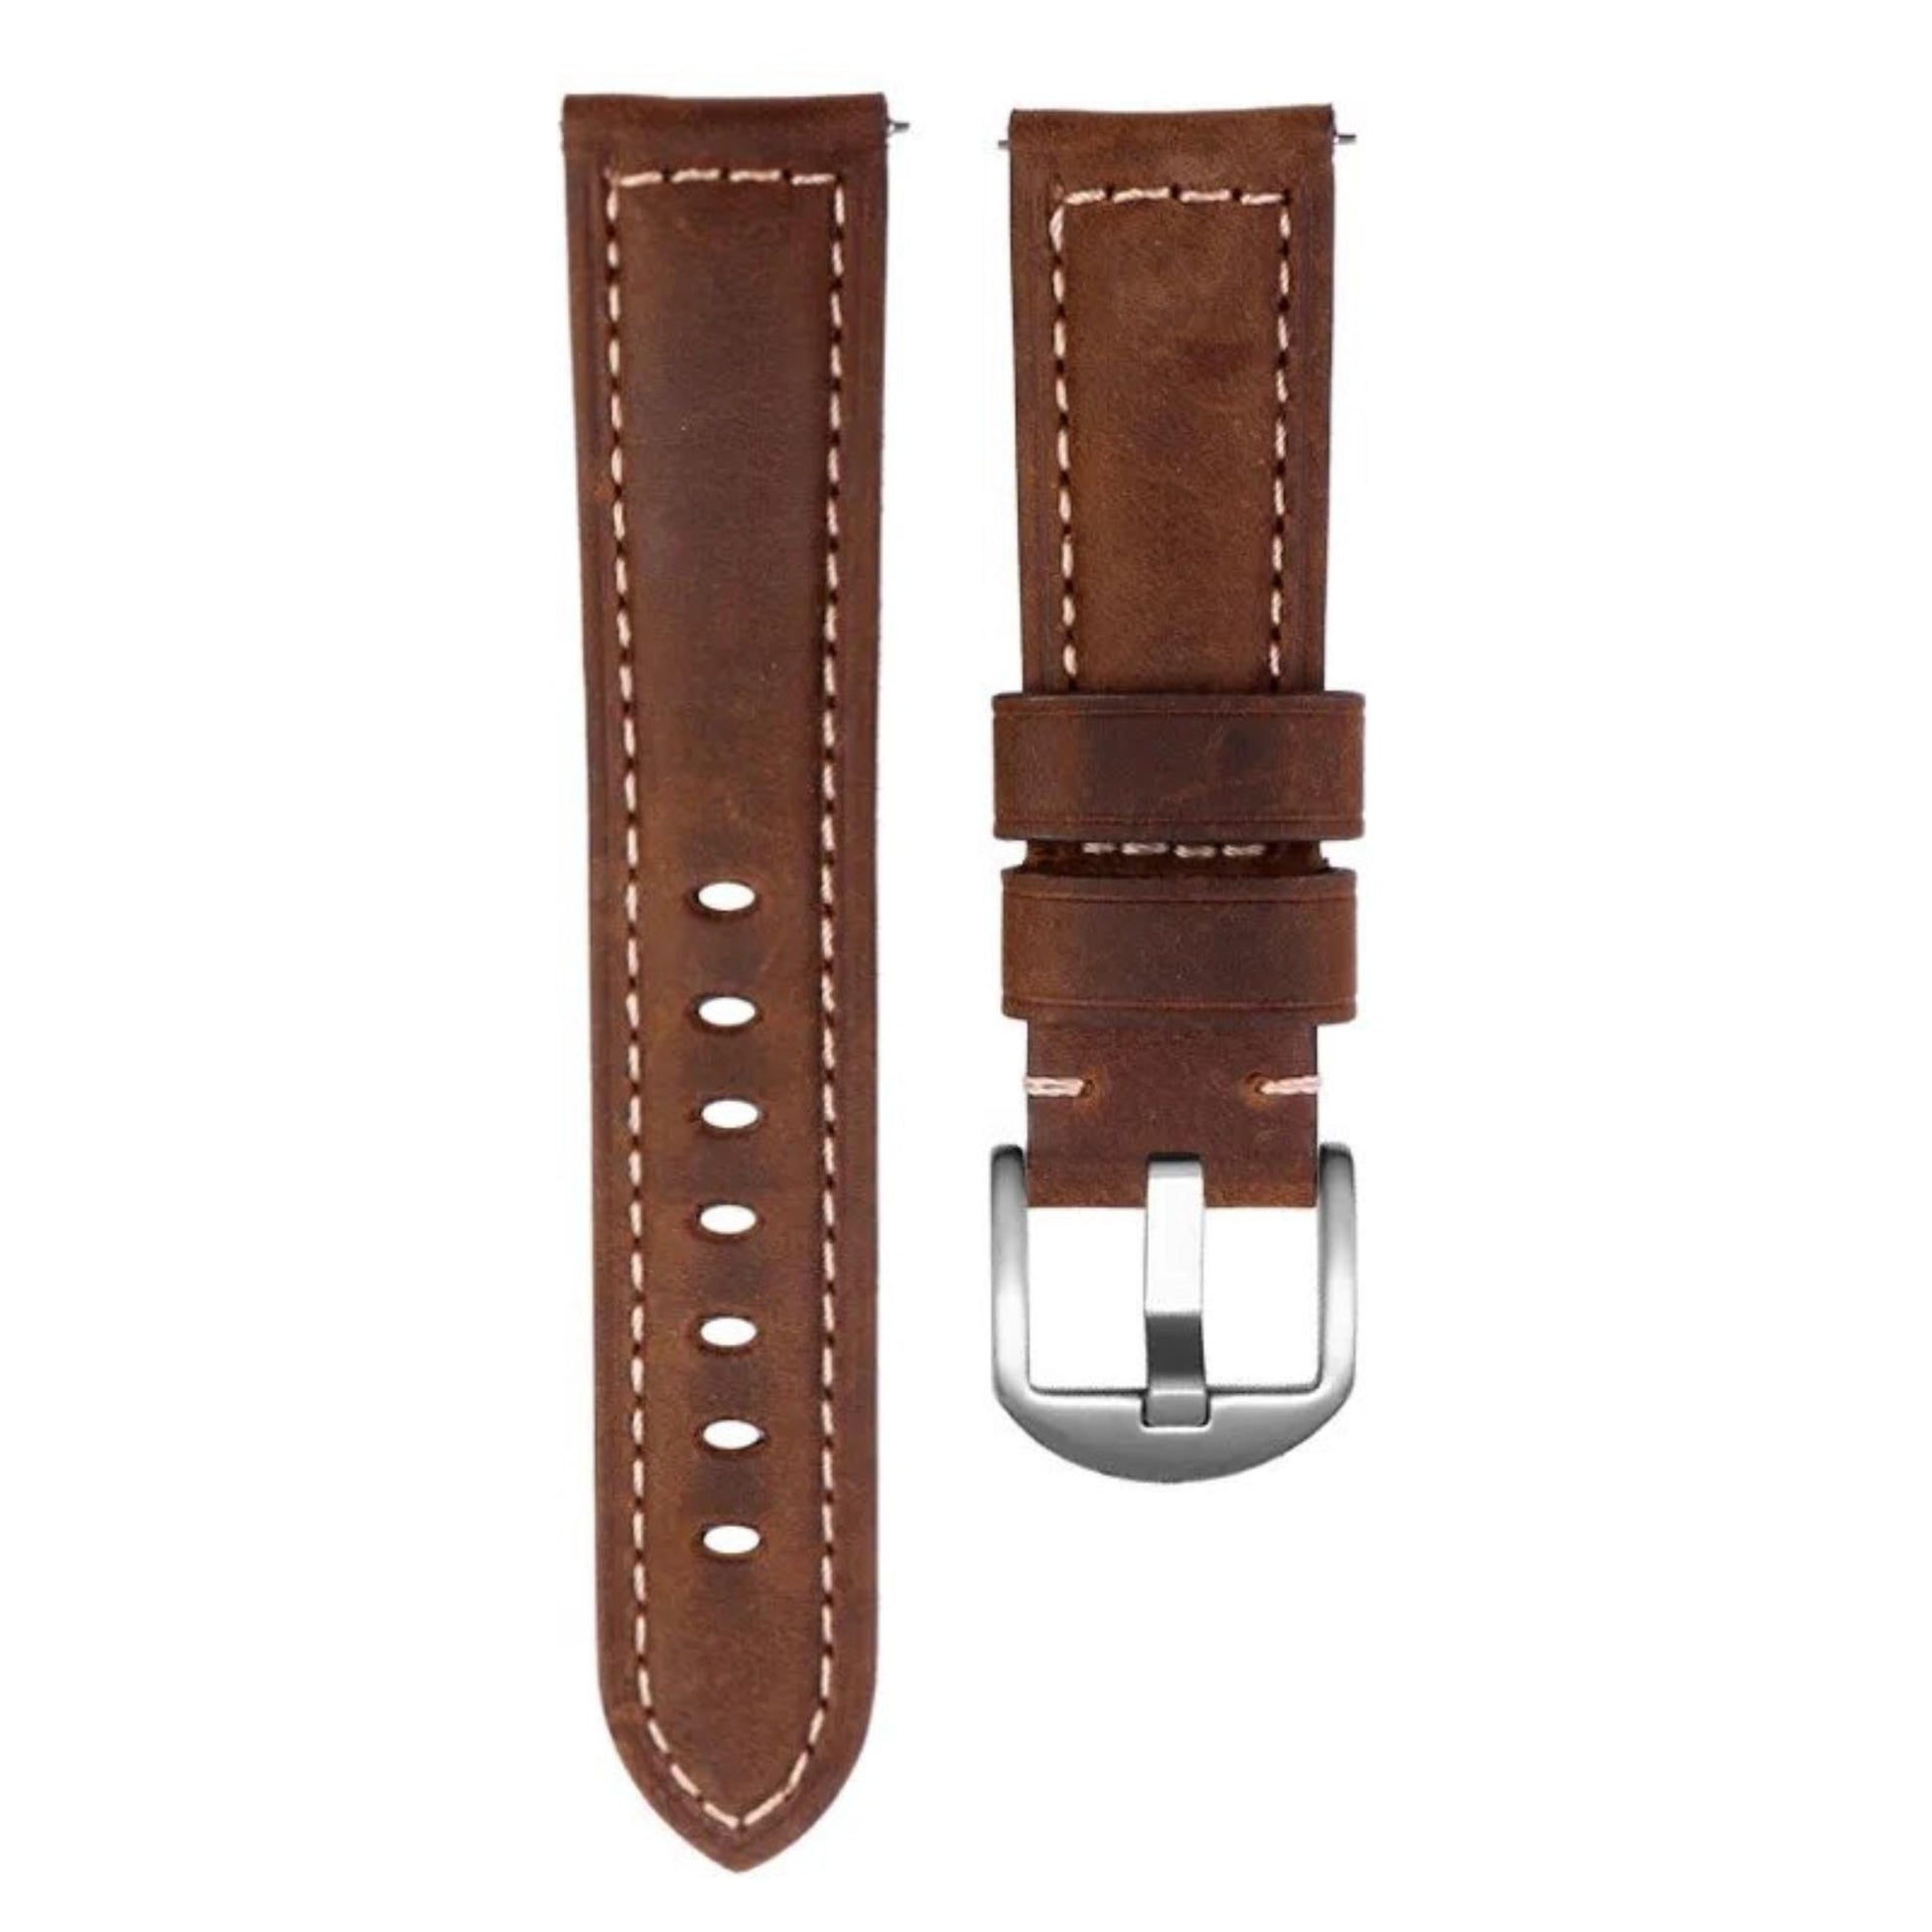 moonswatch strap brown leather